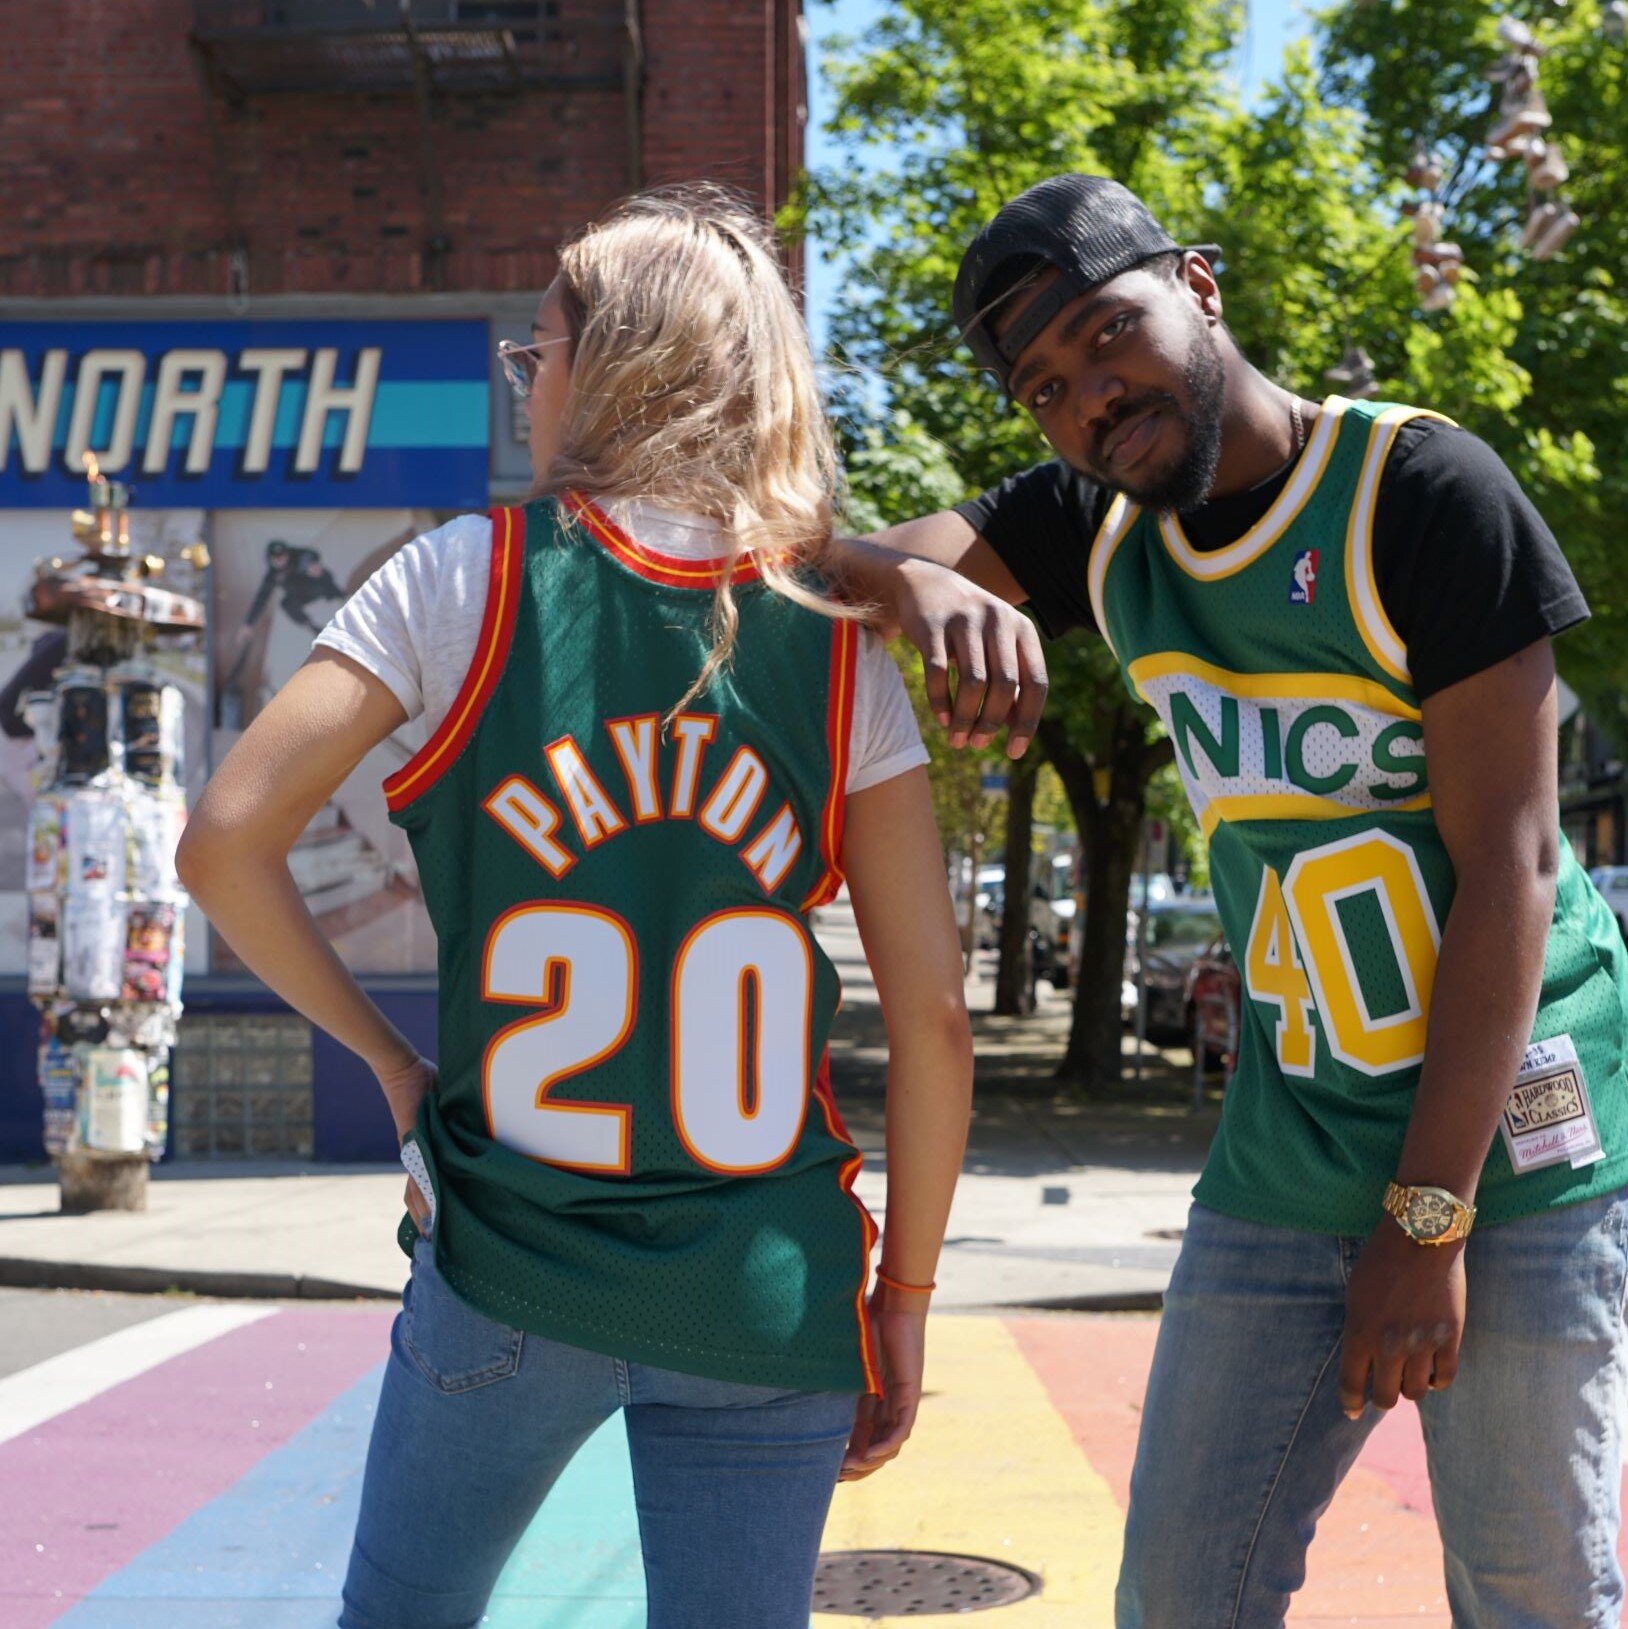 Sonics Jerseys Through the Years — Sonics Forever